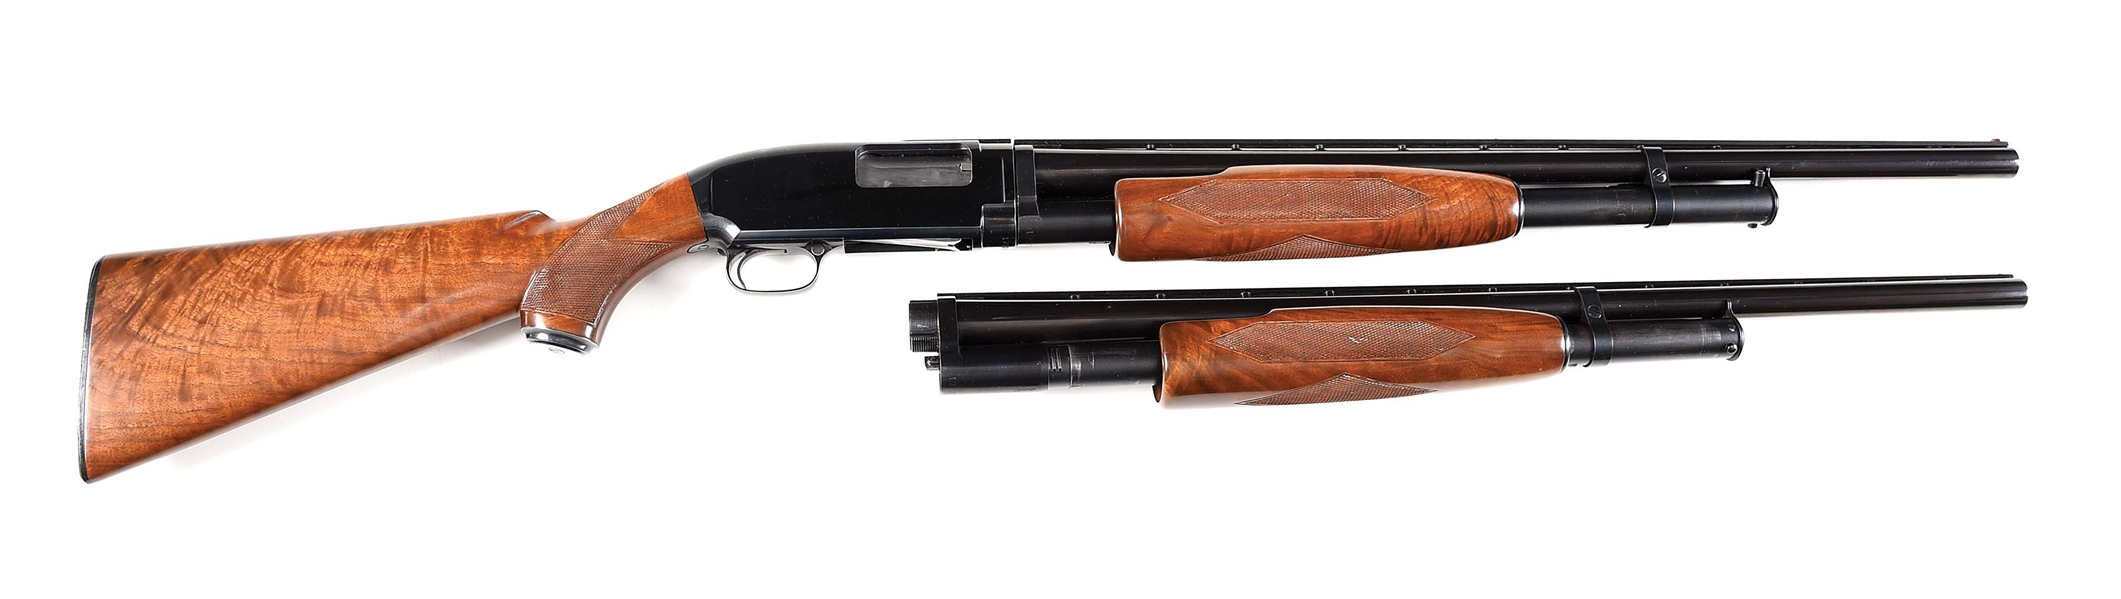 (C) WINCHESTER MODEL 12 SLIDE ACTION SHOTGUN WITH CASE, EXTRA BARREL SET, FROM HOWARD HAWKS, EARLY AMERICAN FILM DIRECTOR.